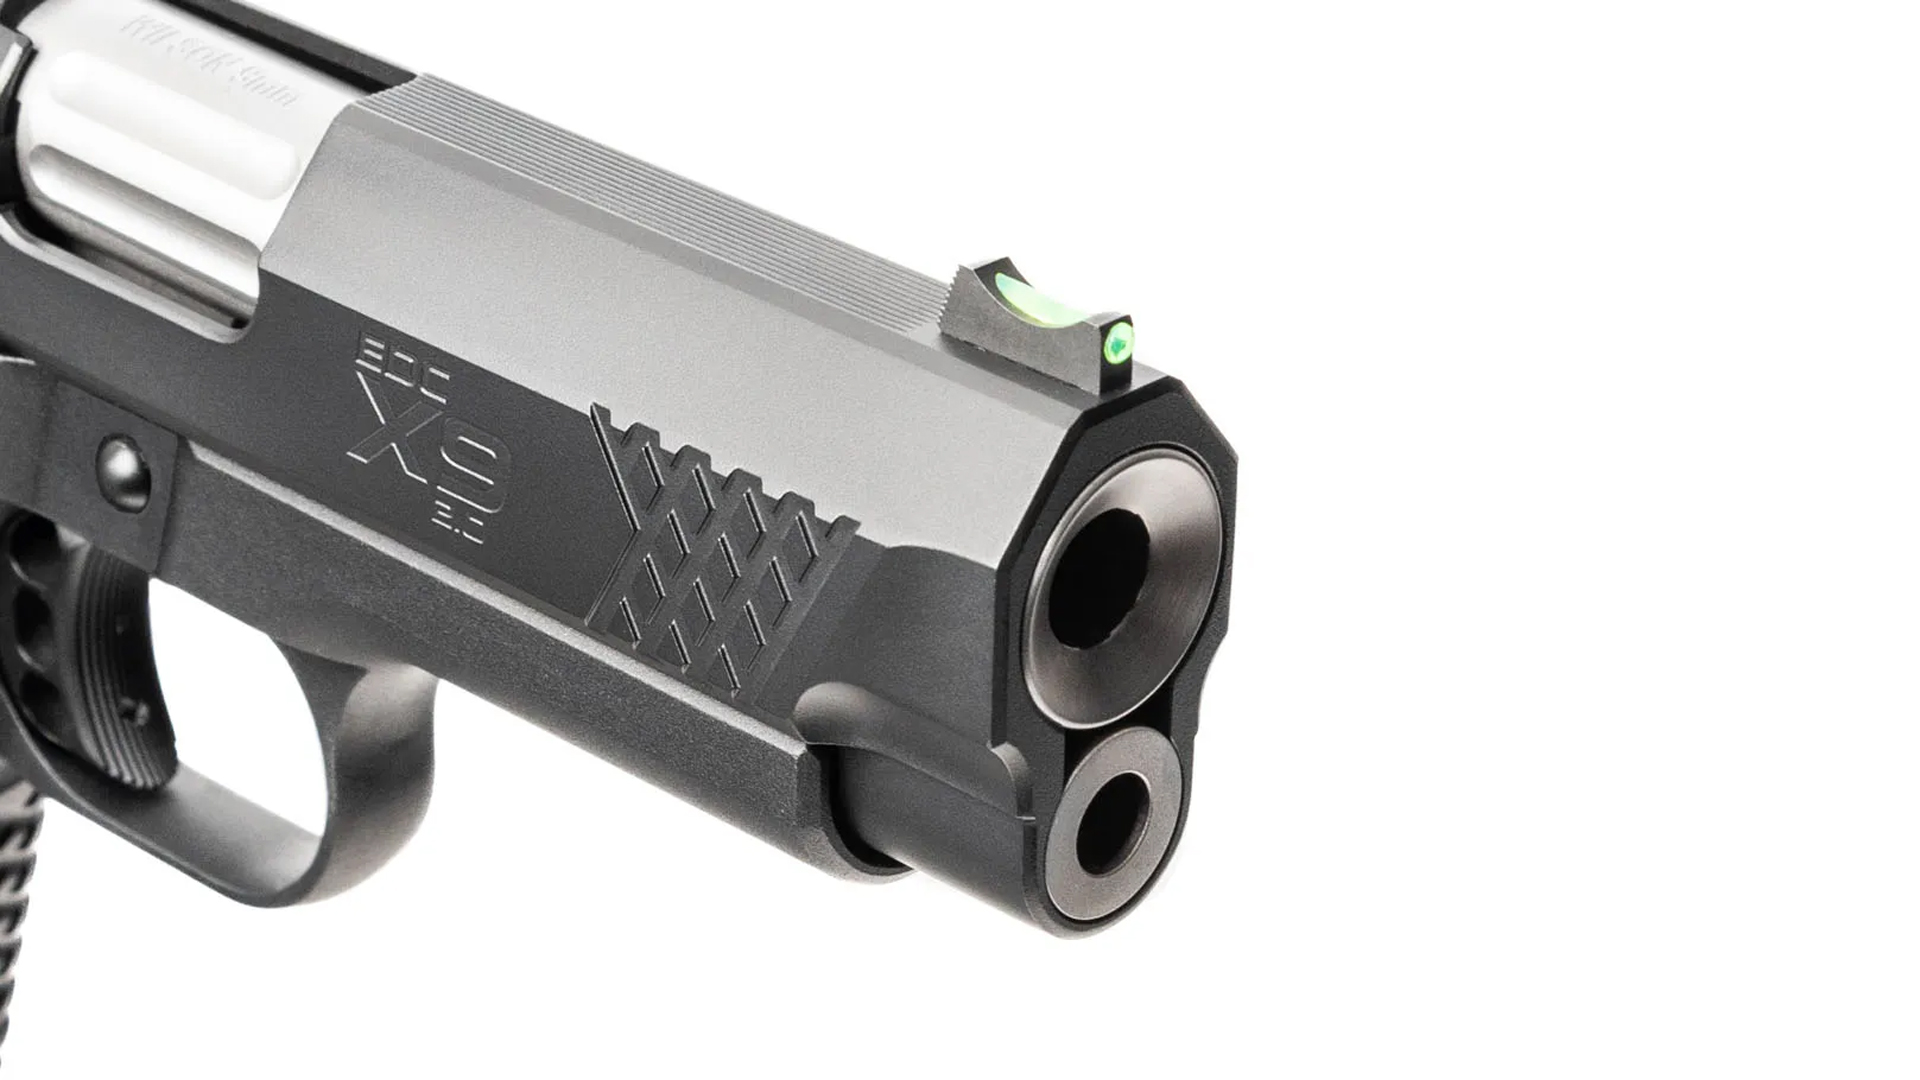 The fiber-optic front sight and muzzle on the Wilson Combat EDC X9 2.0 pistol.